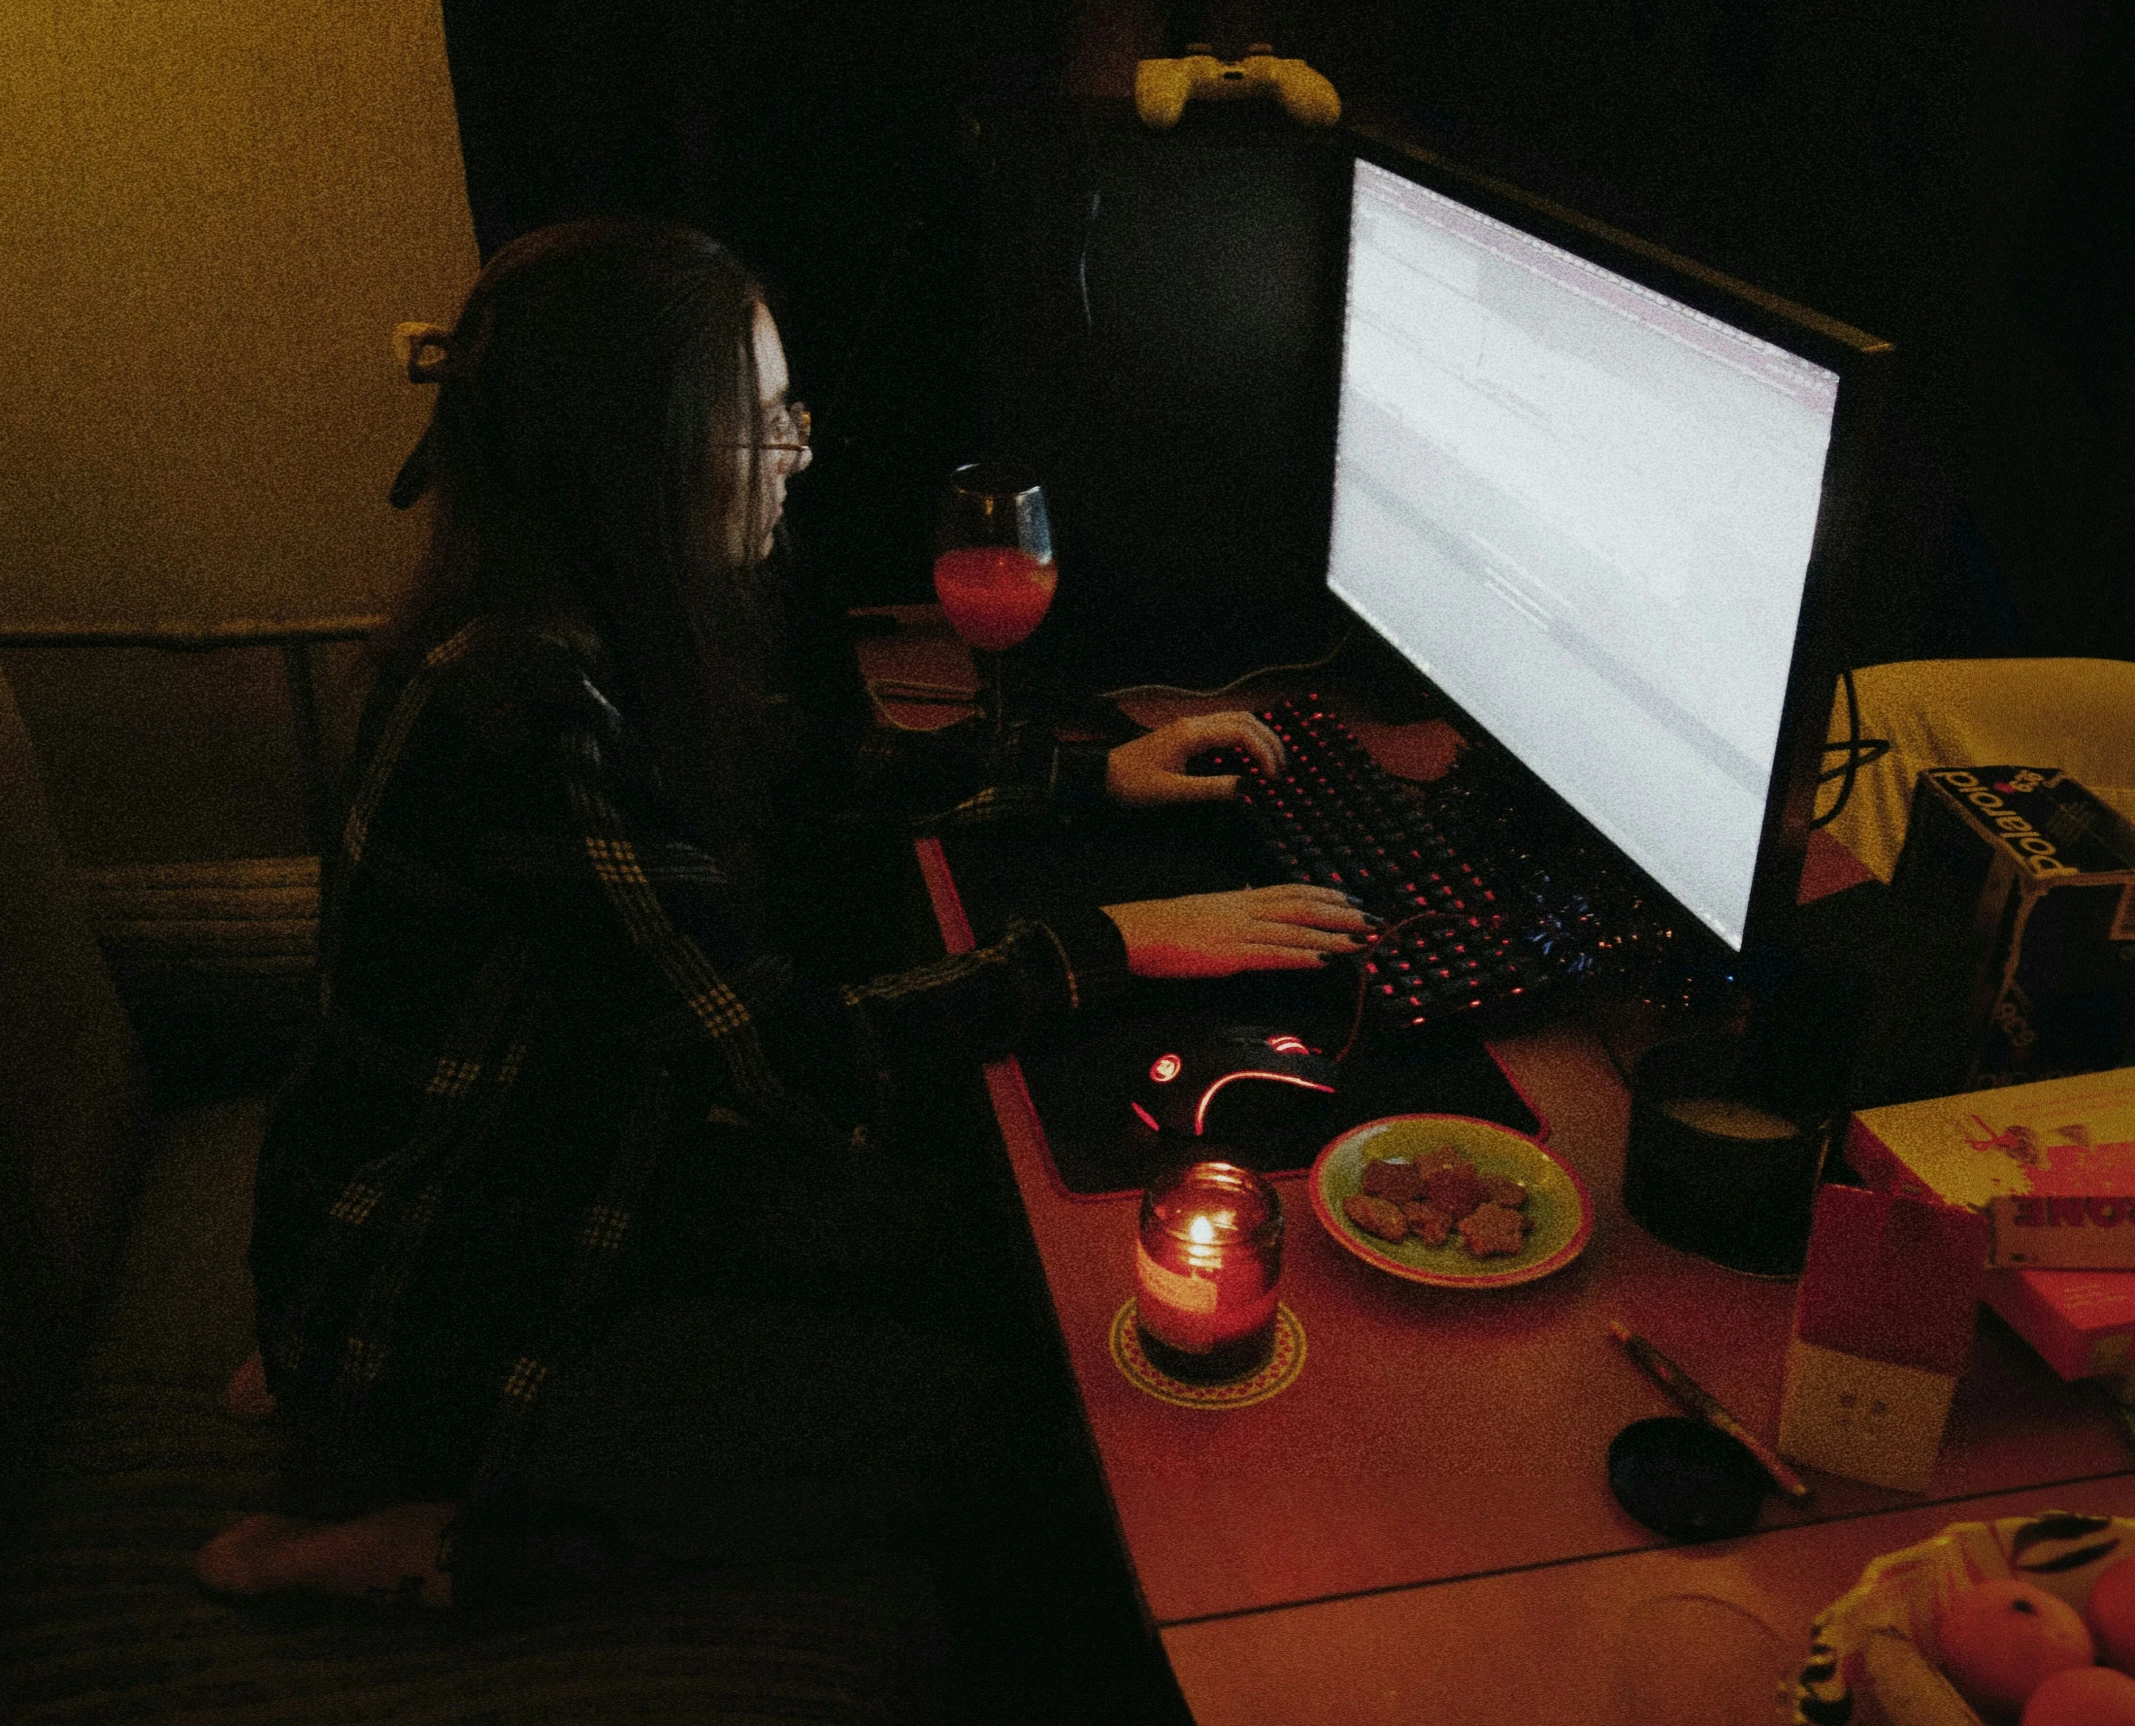 an image of a person in front of a computer